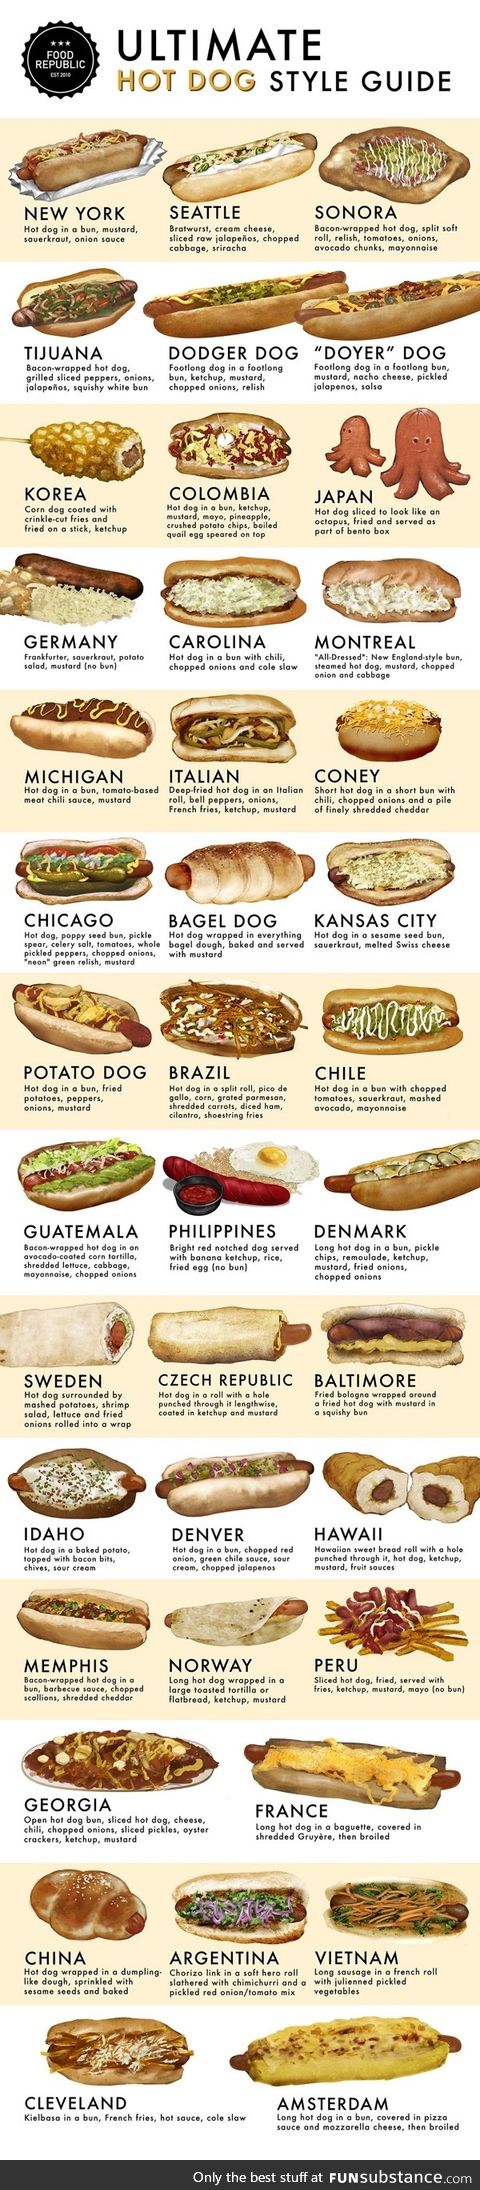 The ultimate hot dog style guide